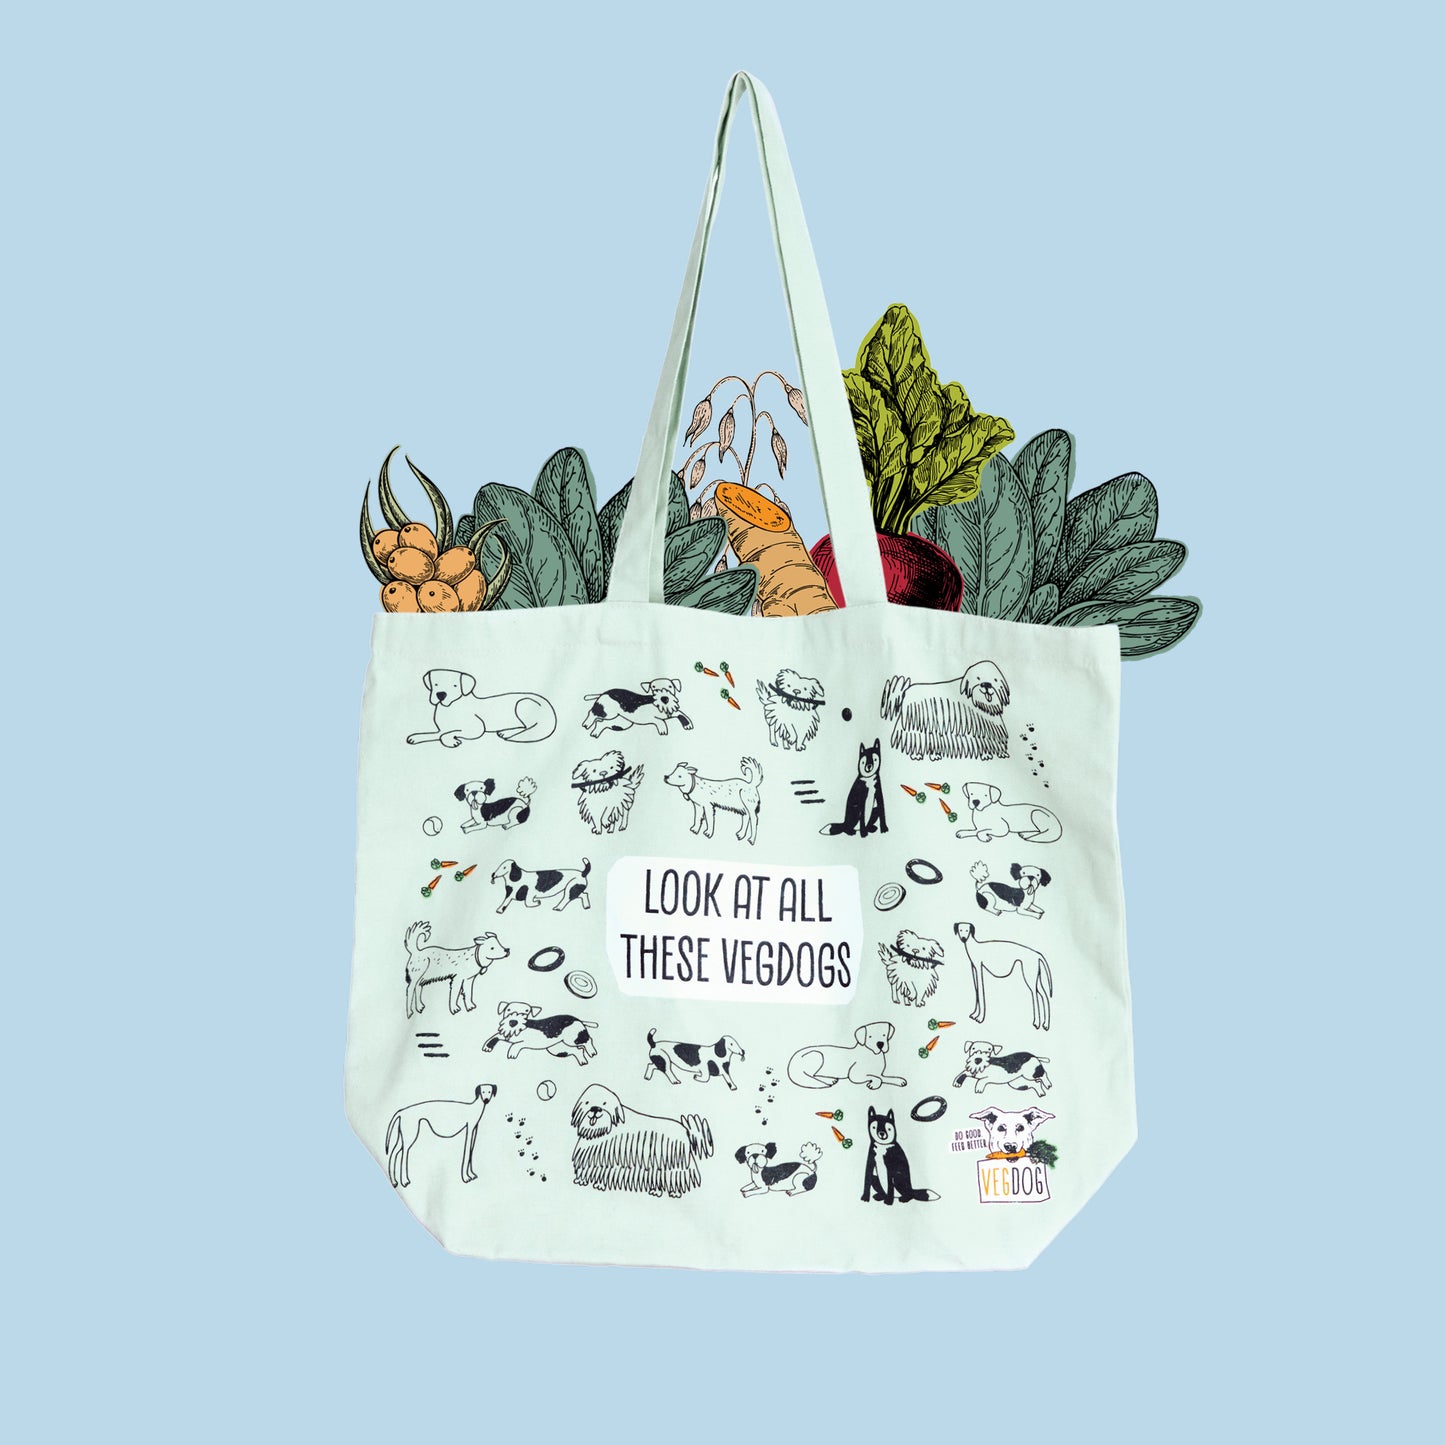 Tasche "Look at all these VEGDOGs"